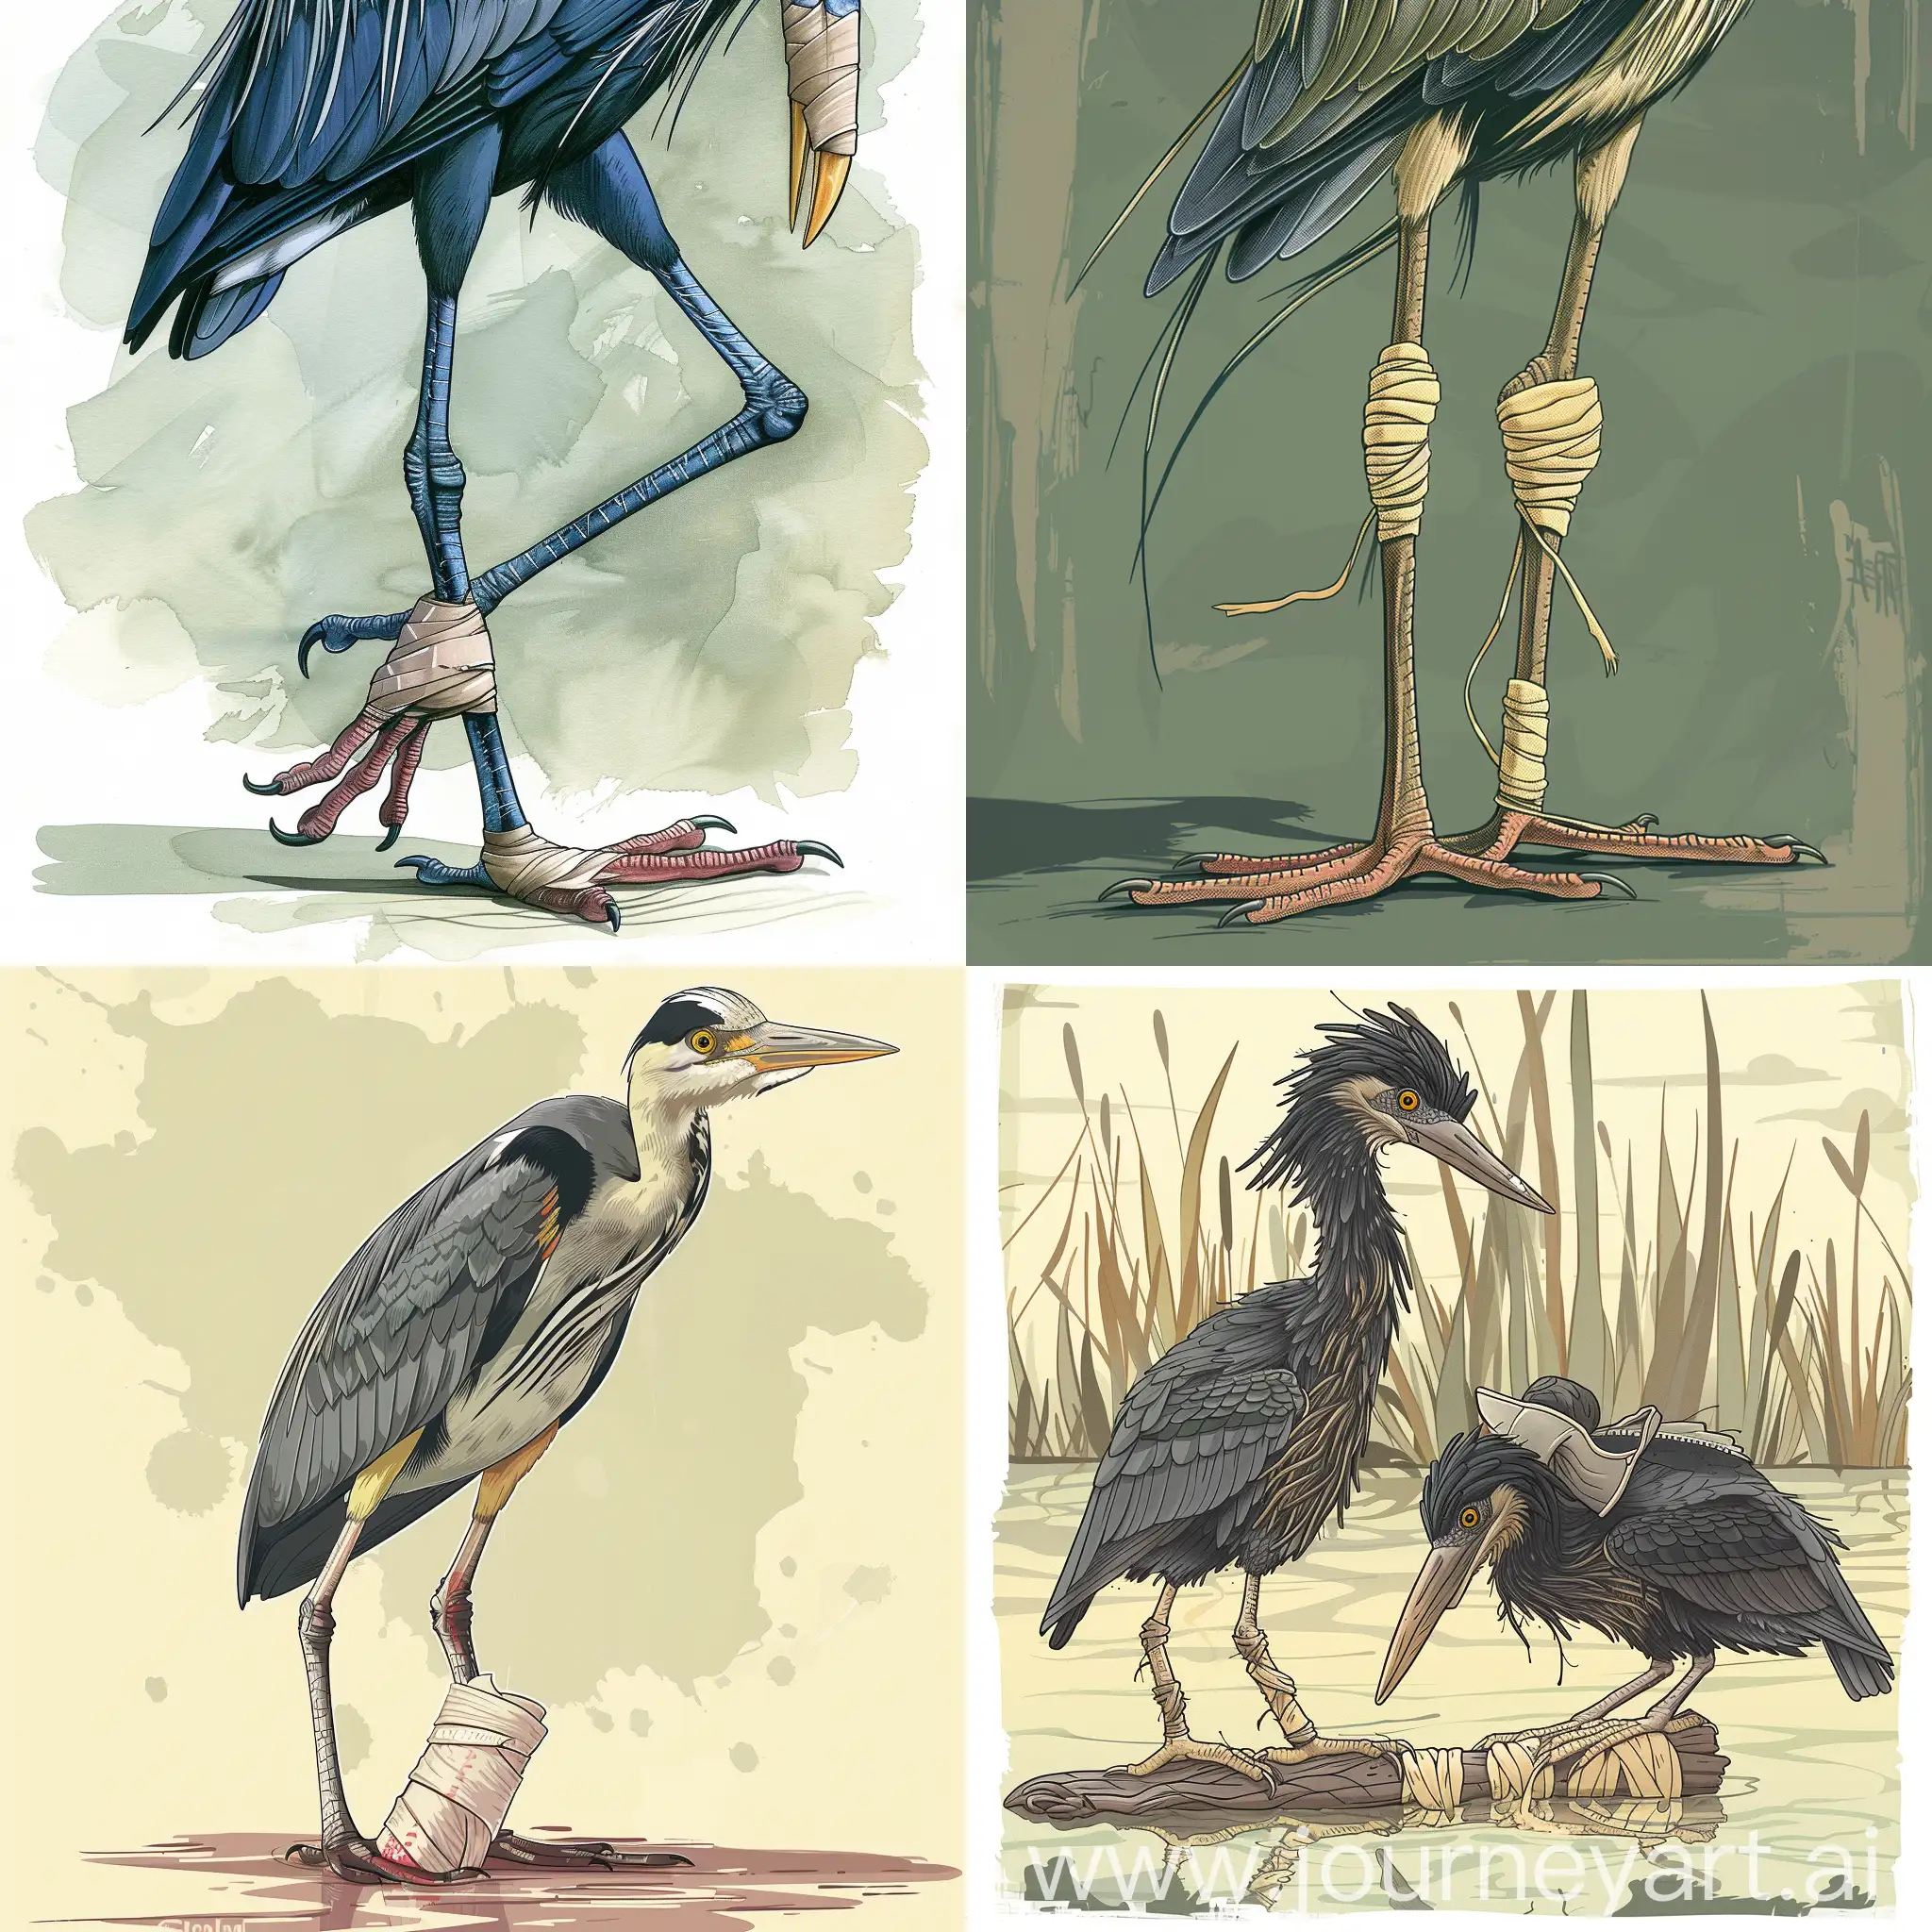 an illustration of Herons that it foot is in medical bandage